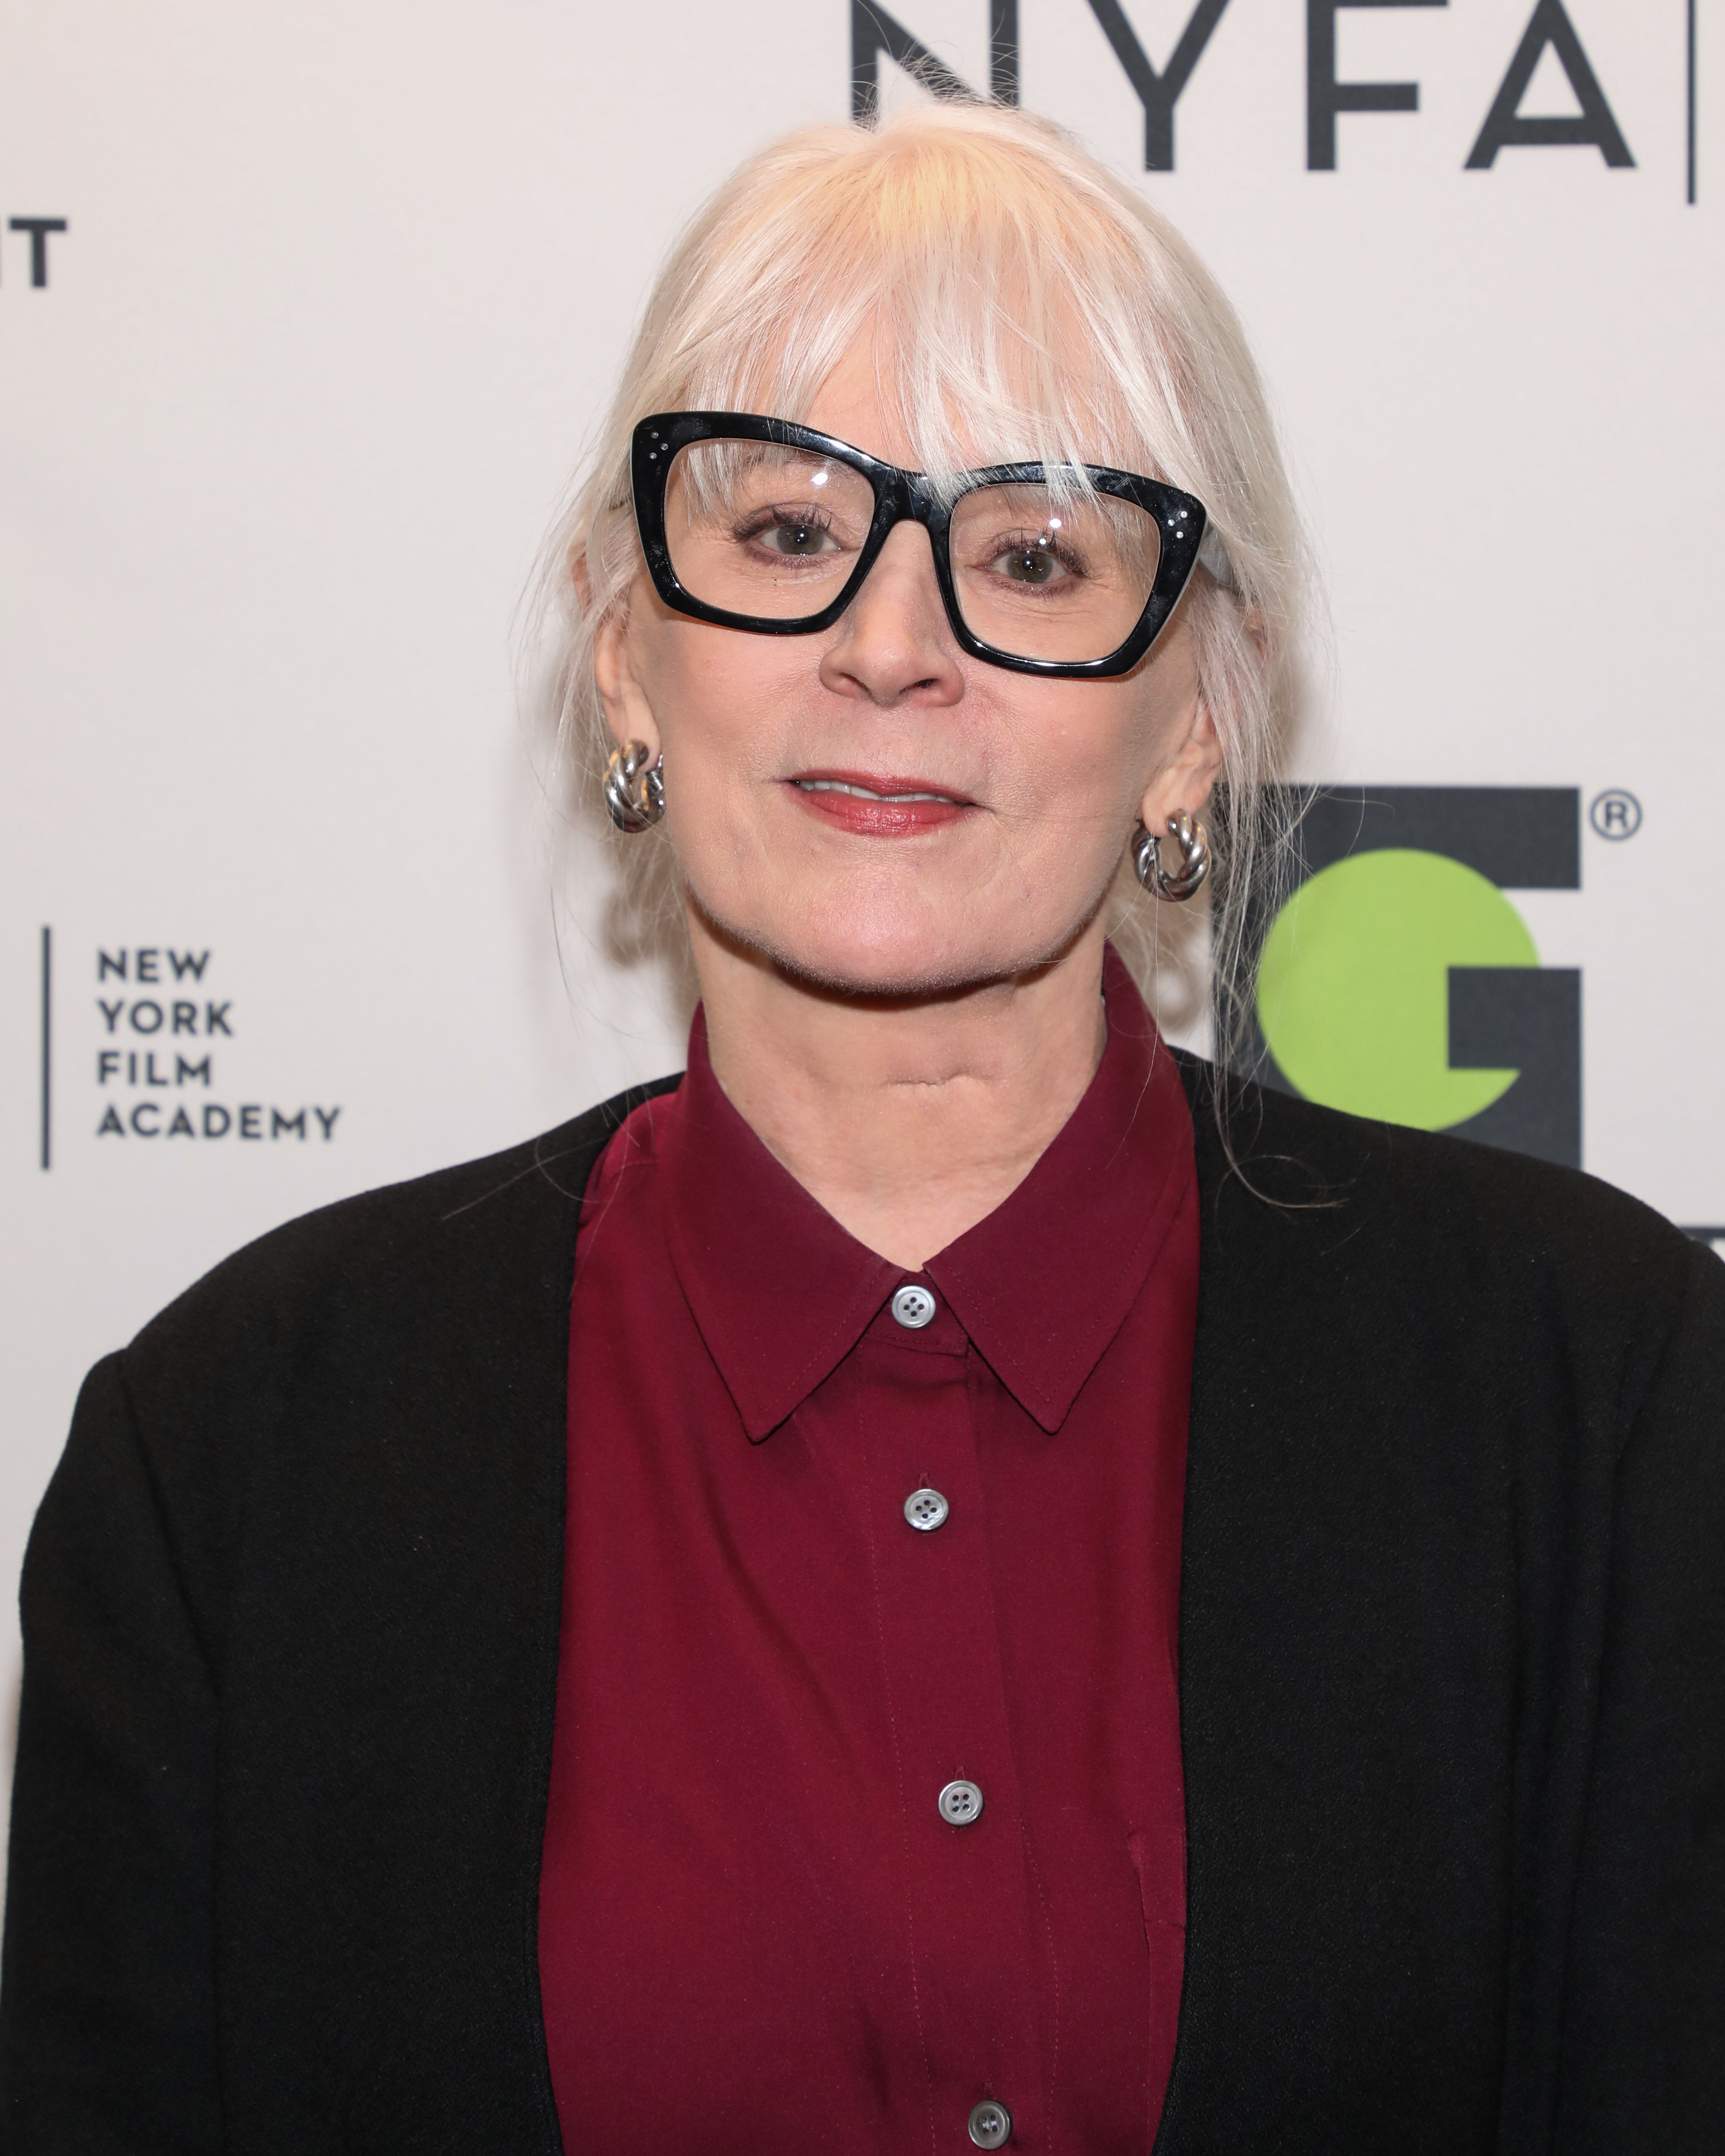 Actress in a dark blouse with buttoned collar, glasses, at NYFA event